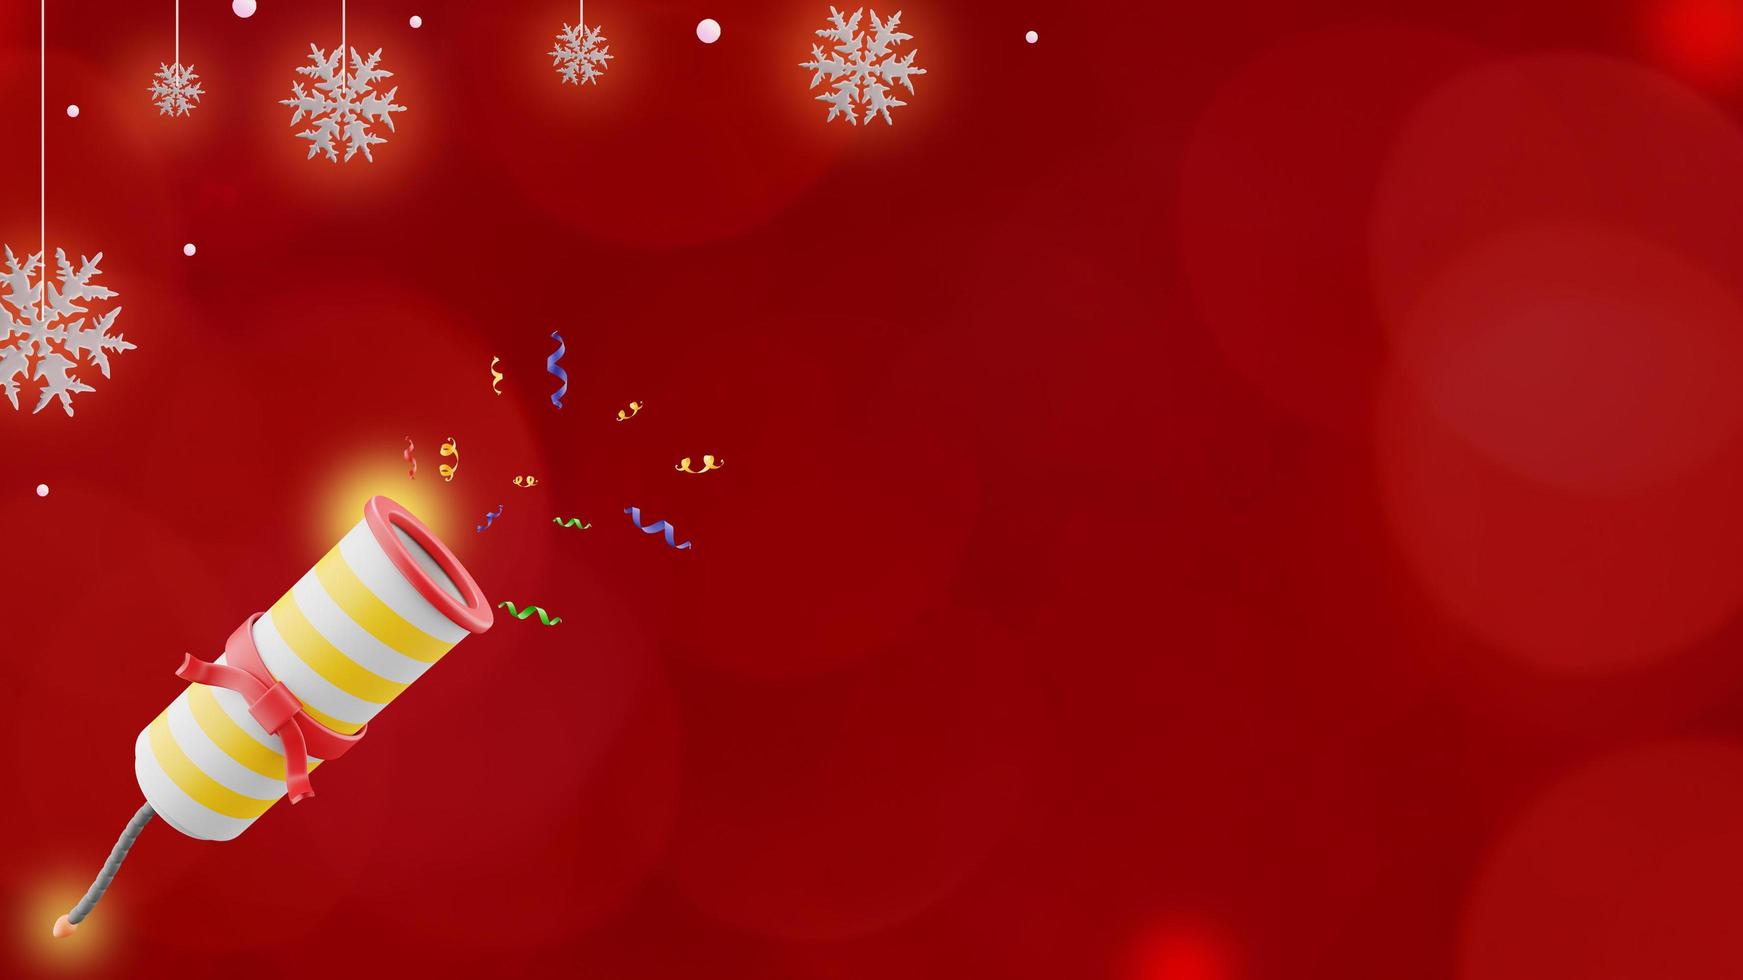 Christmas background on red background with fire cracker and snowflakes in copy space photo